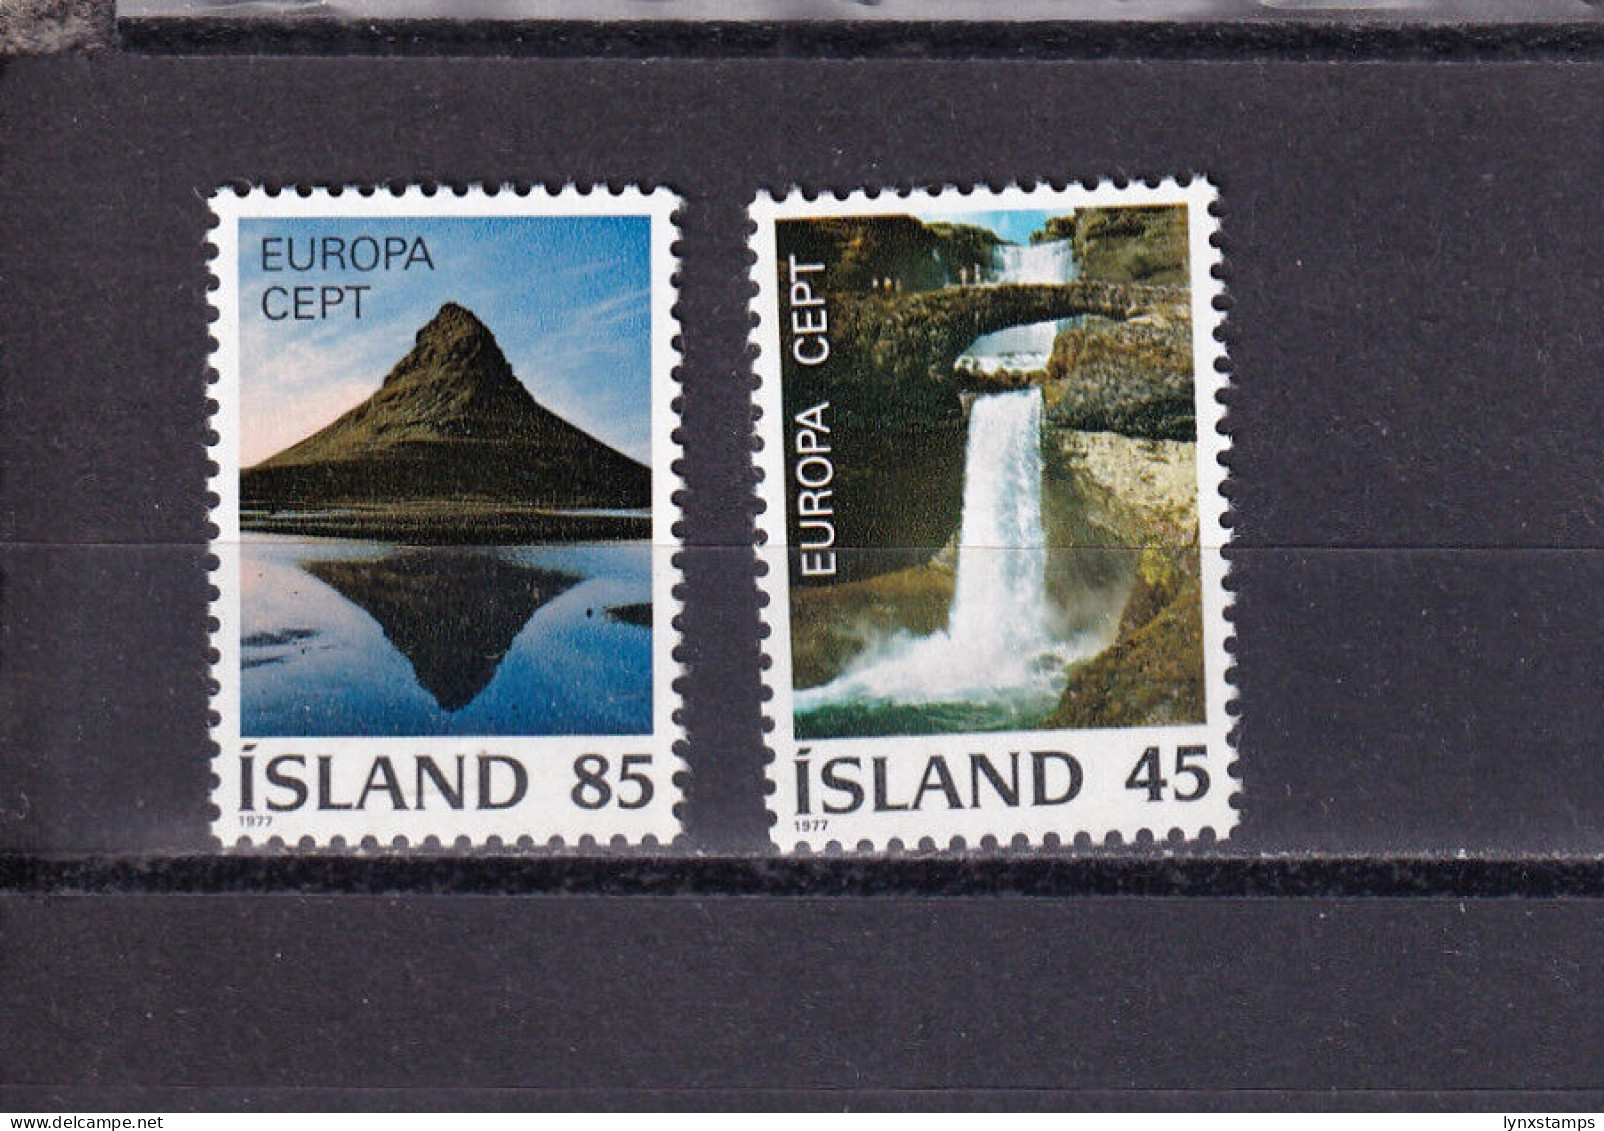 LI03 Iceland Europa (C.E.P.T.) 1977 - Landscapes Mint Stamps Selection - Unused Stamps